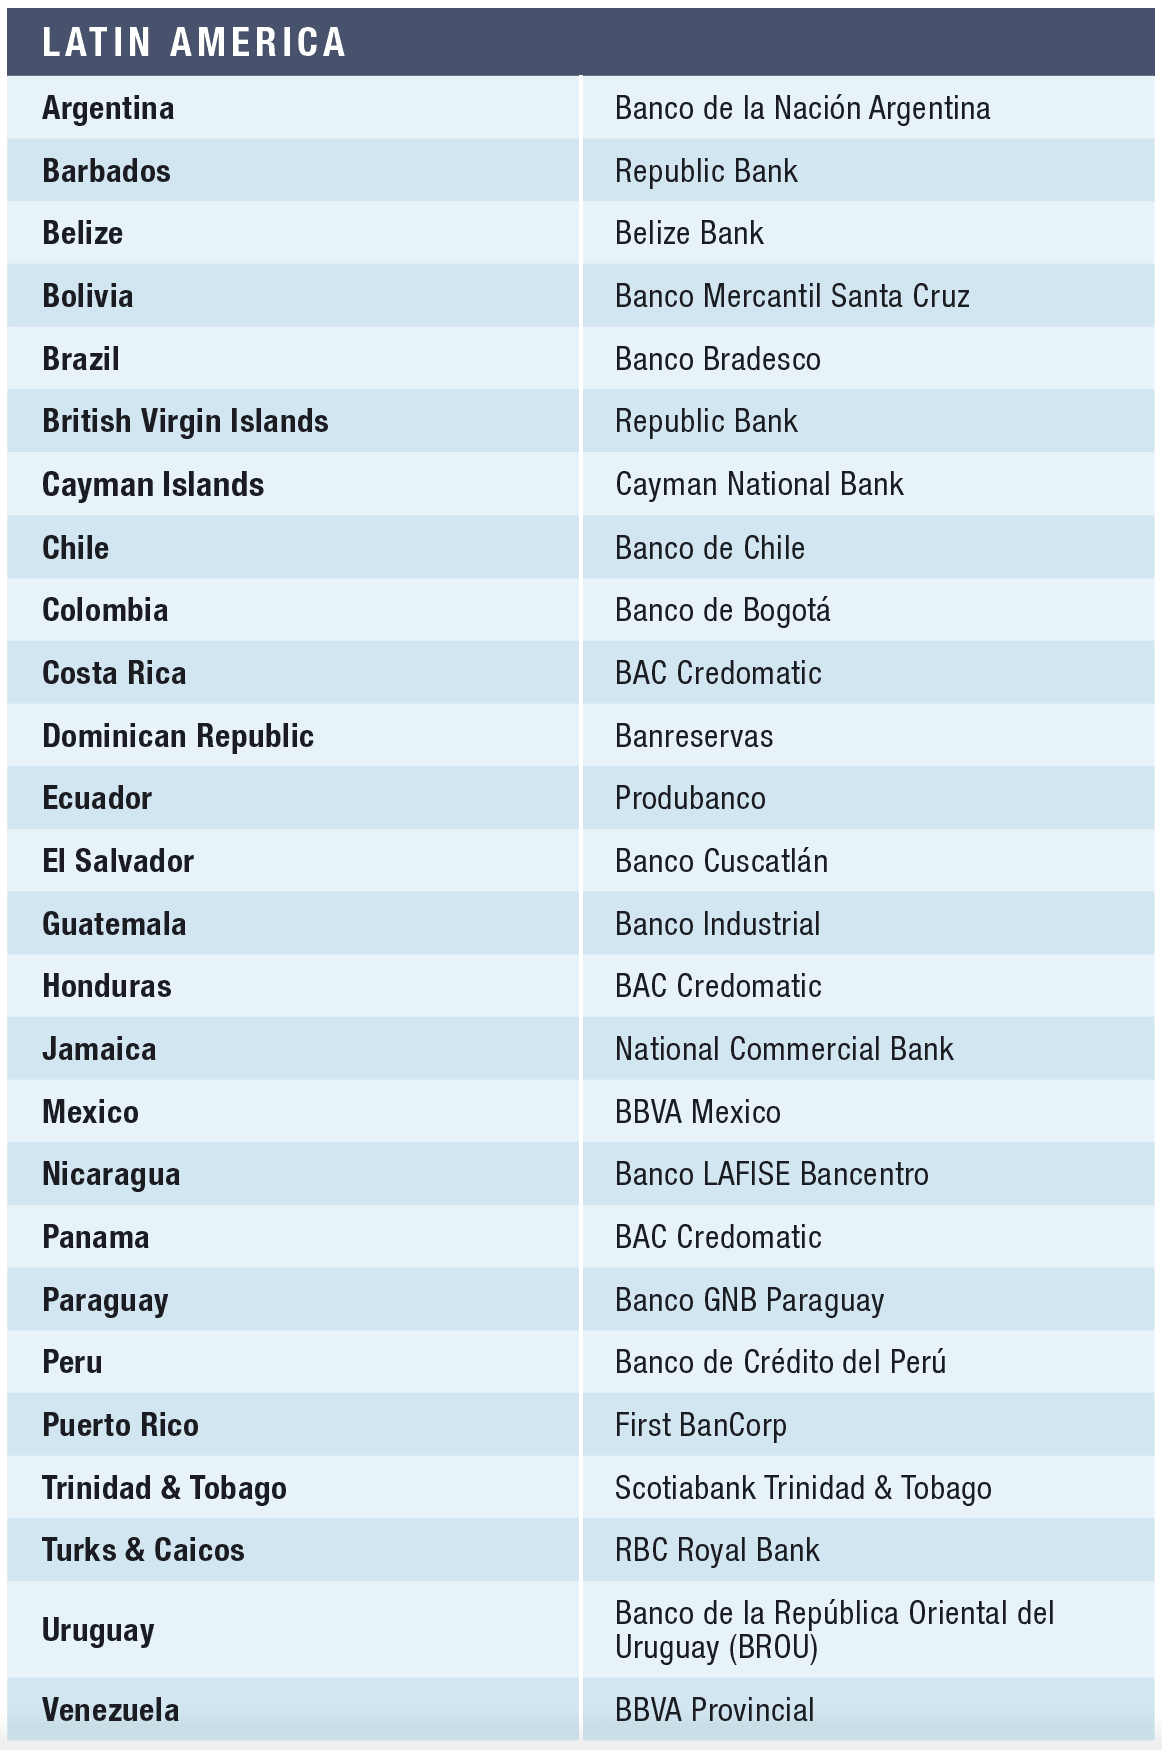 View from Felaban: Latin America's top performing banks - The Banker